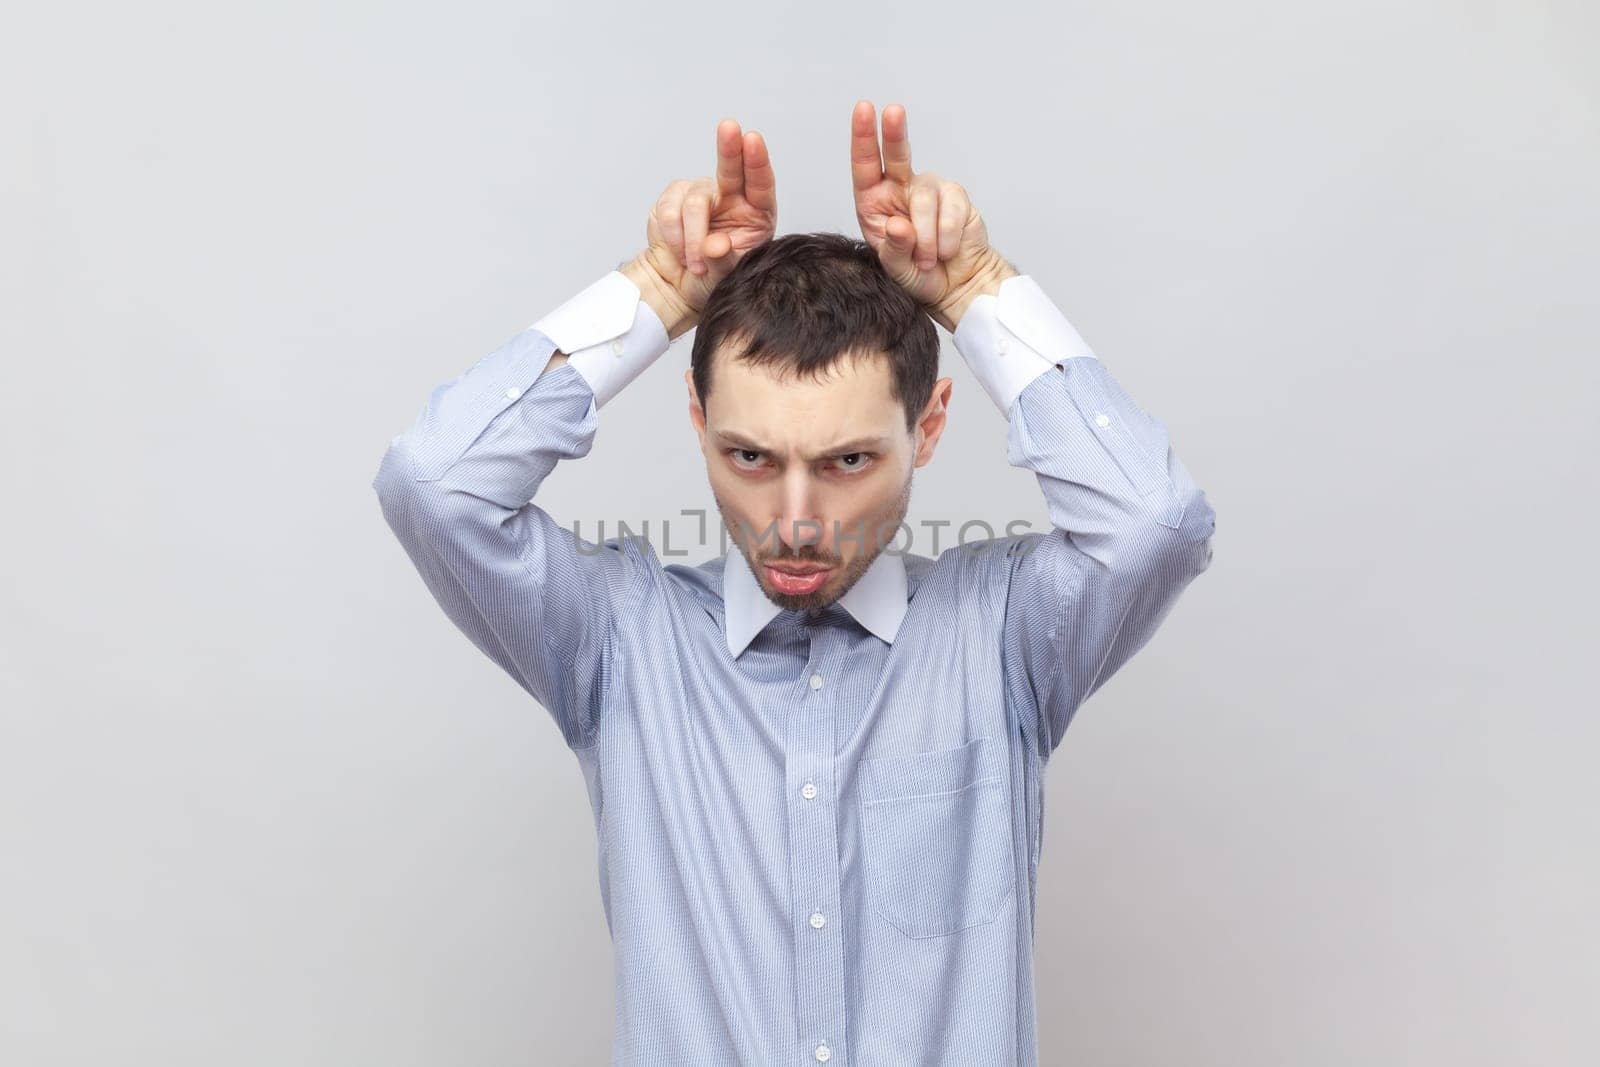 Portrait of angry serious aggressive man standing and showing bully horns, attacks, looks crazy and dangerous, wearing light blue shirt. Indoor studio shot isolated on gray background.